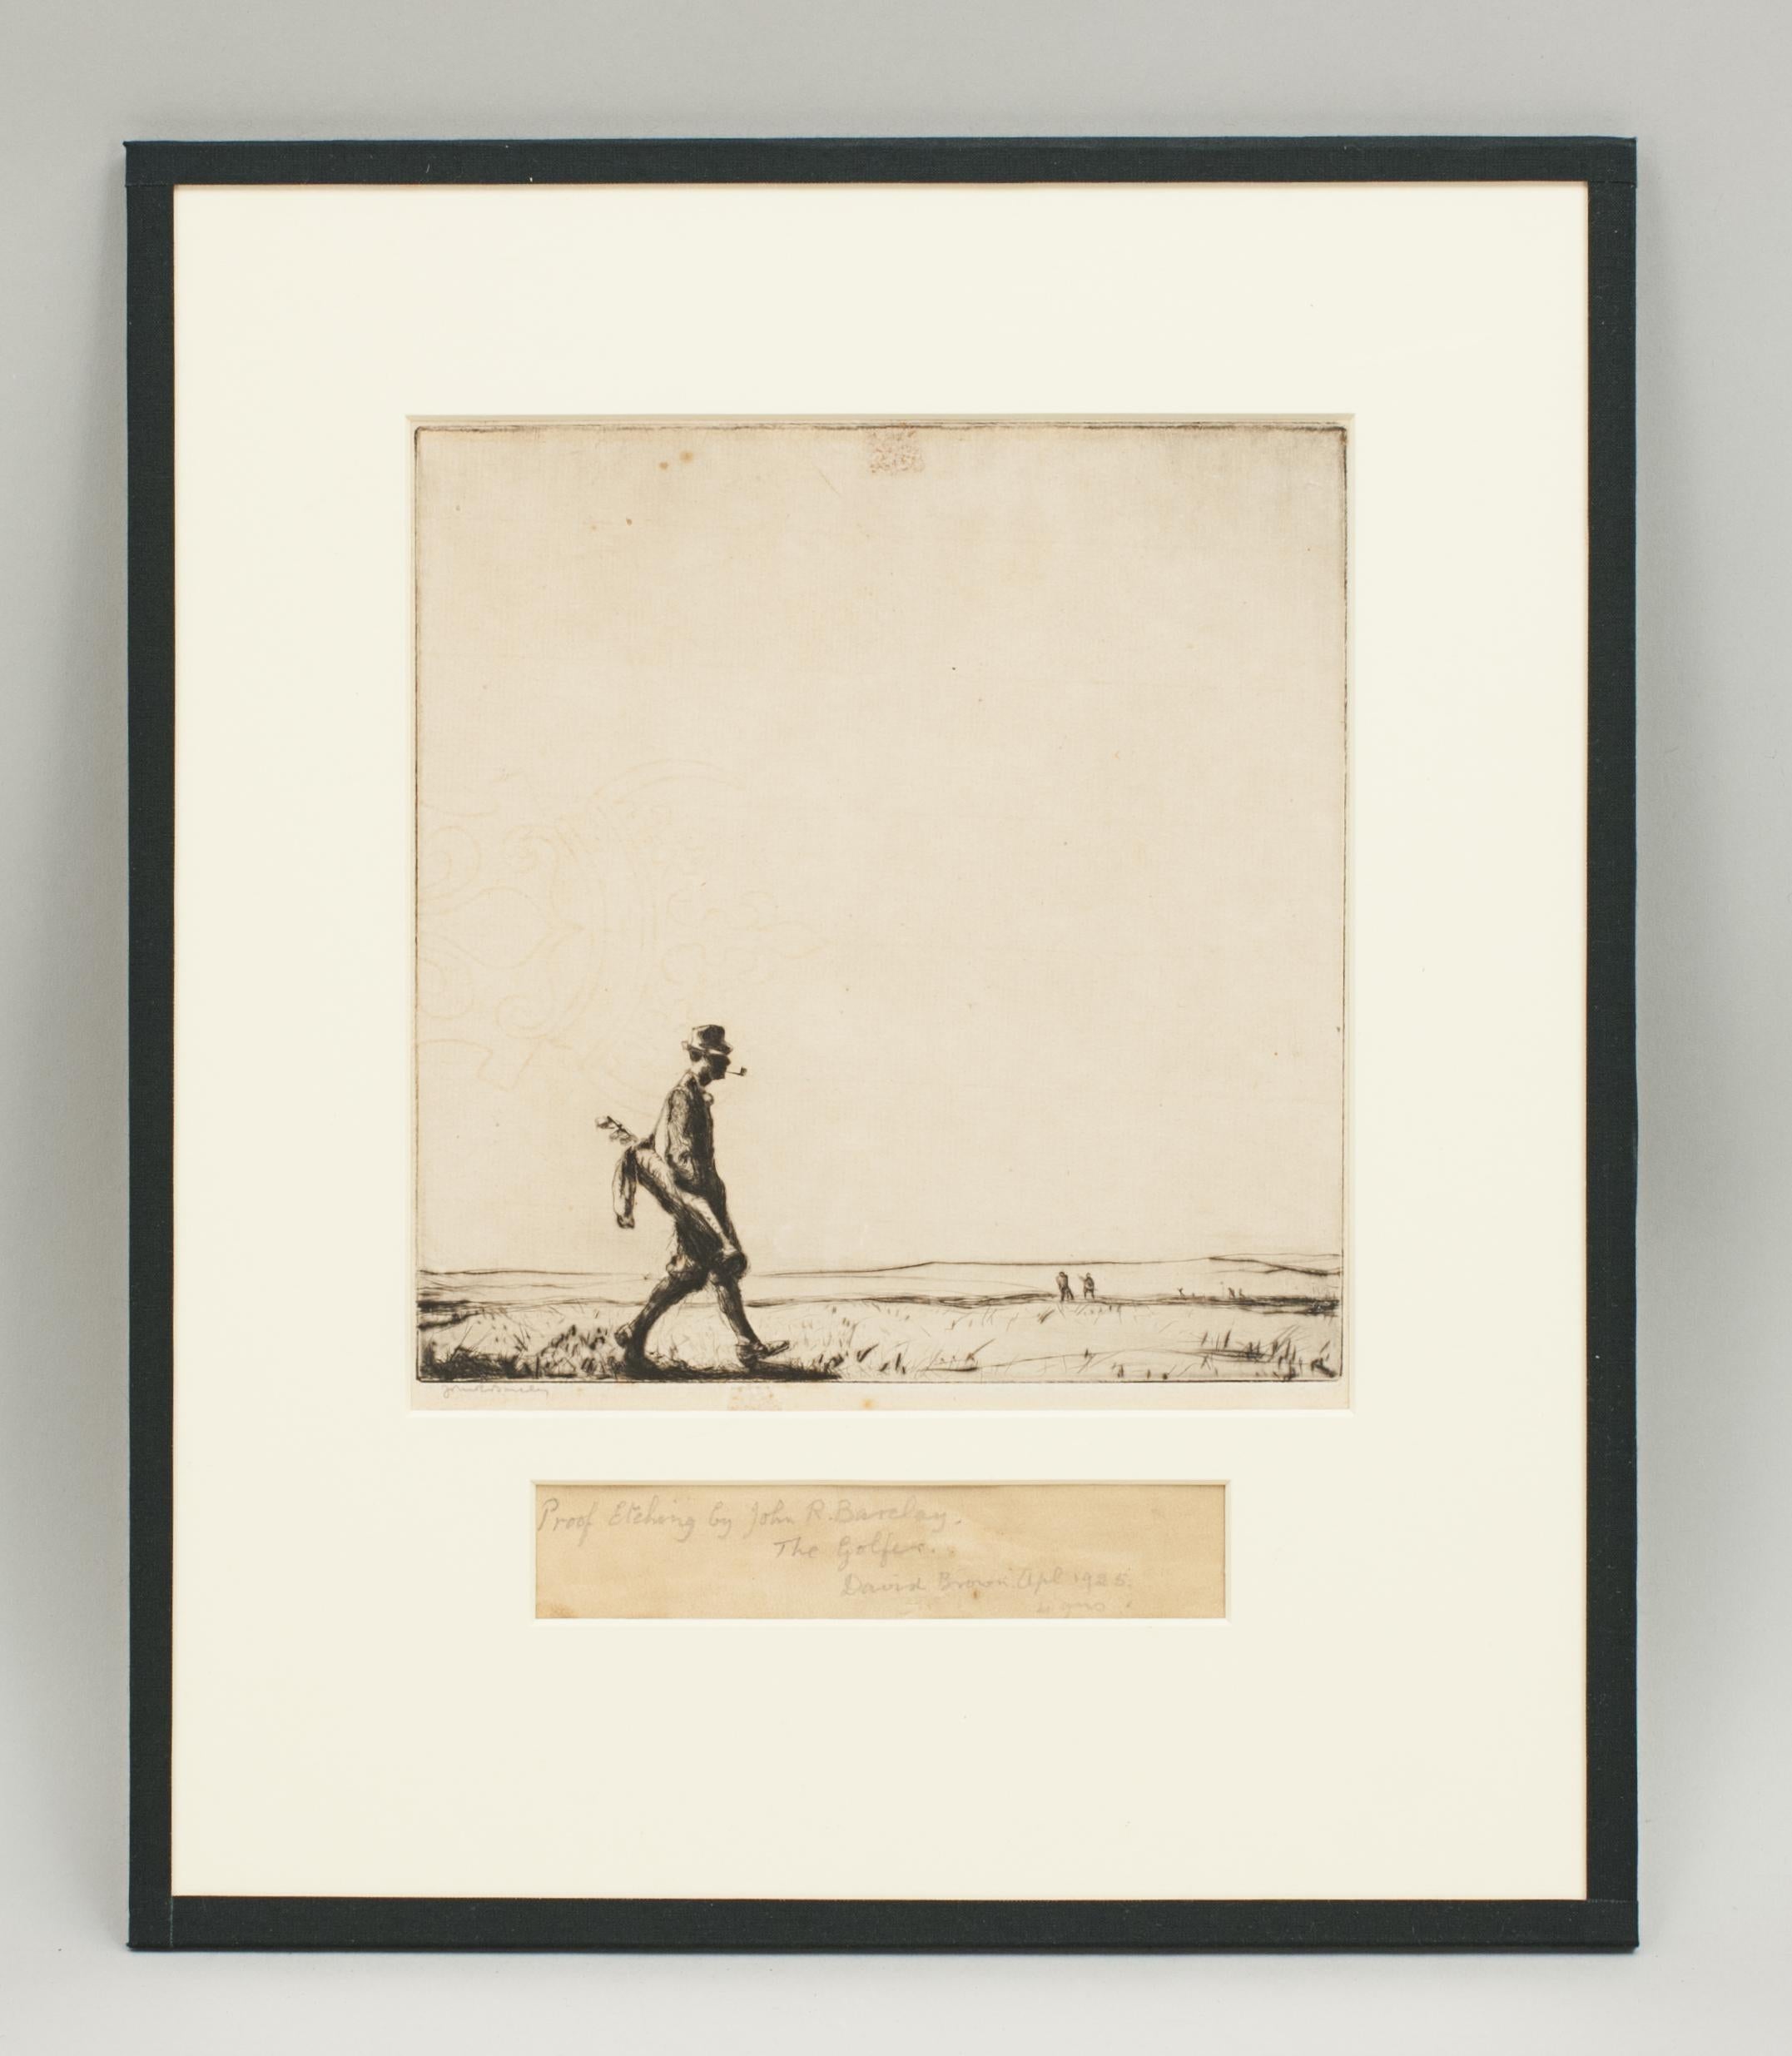 Sporting Art The Golfer, Etching by Barclay